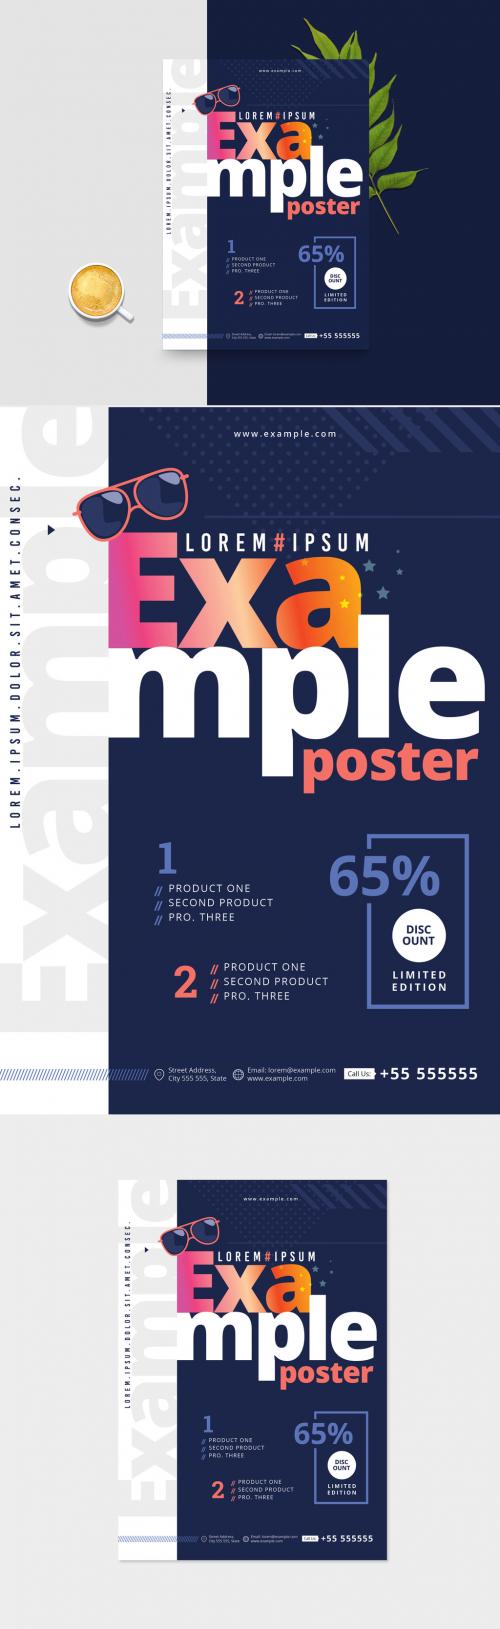 Navy Blue Poster Design Layout with Star Accents - 265205115